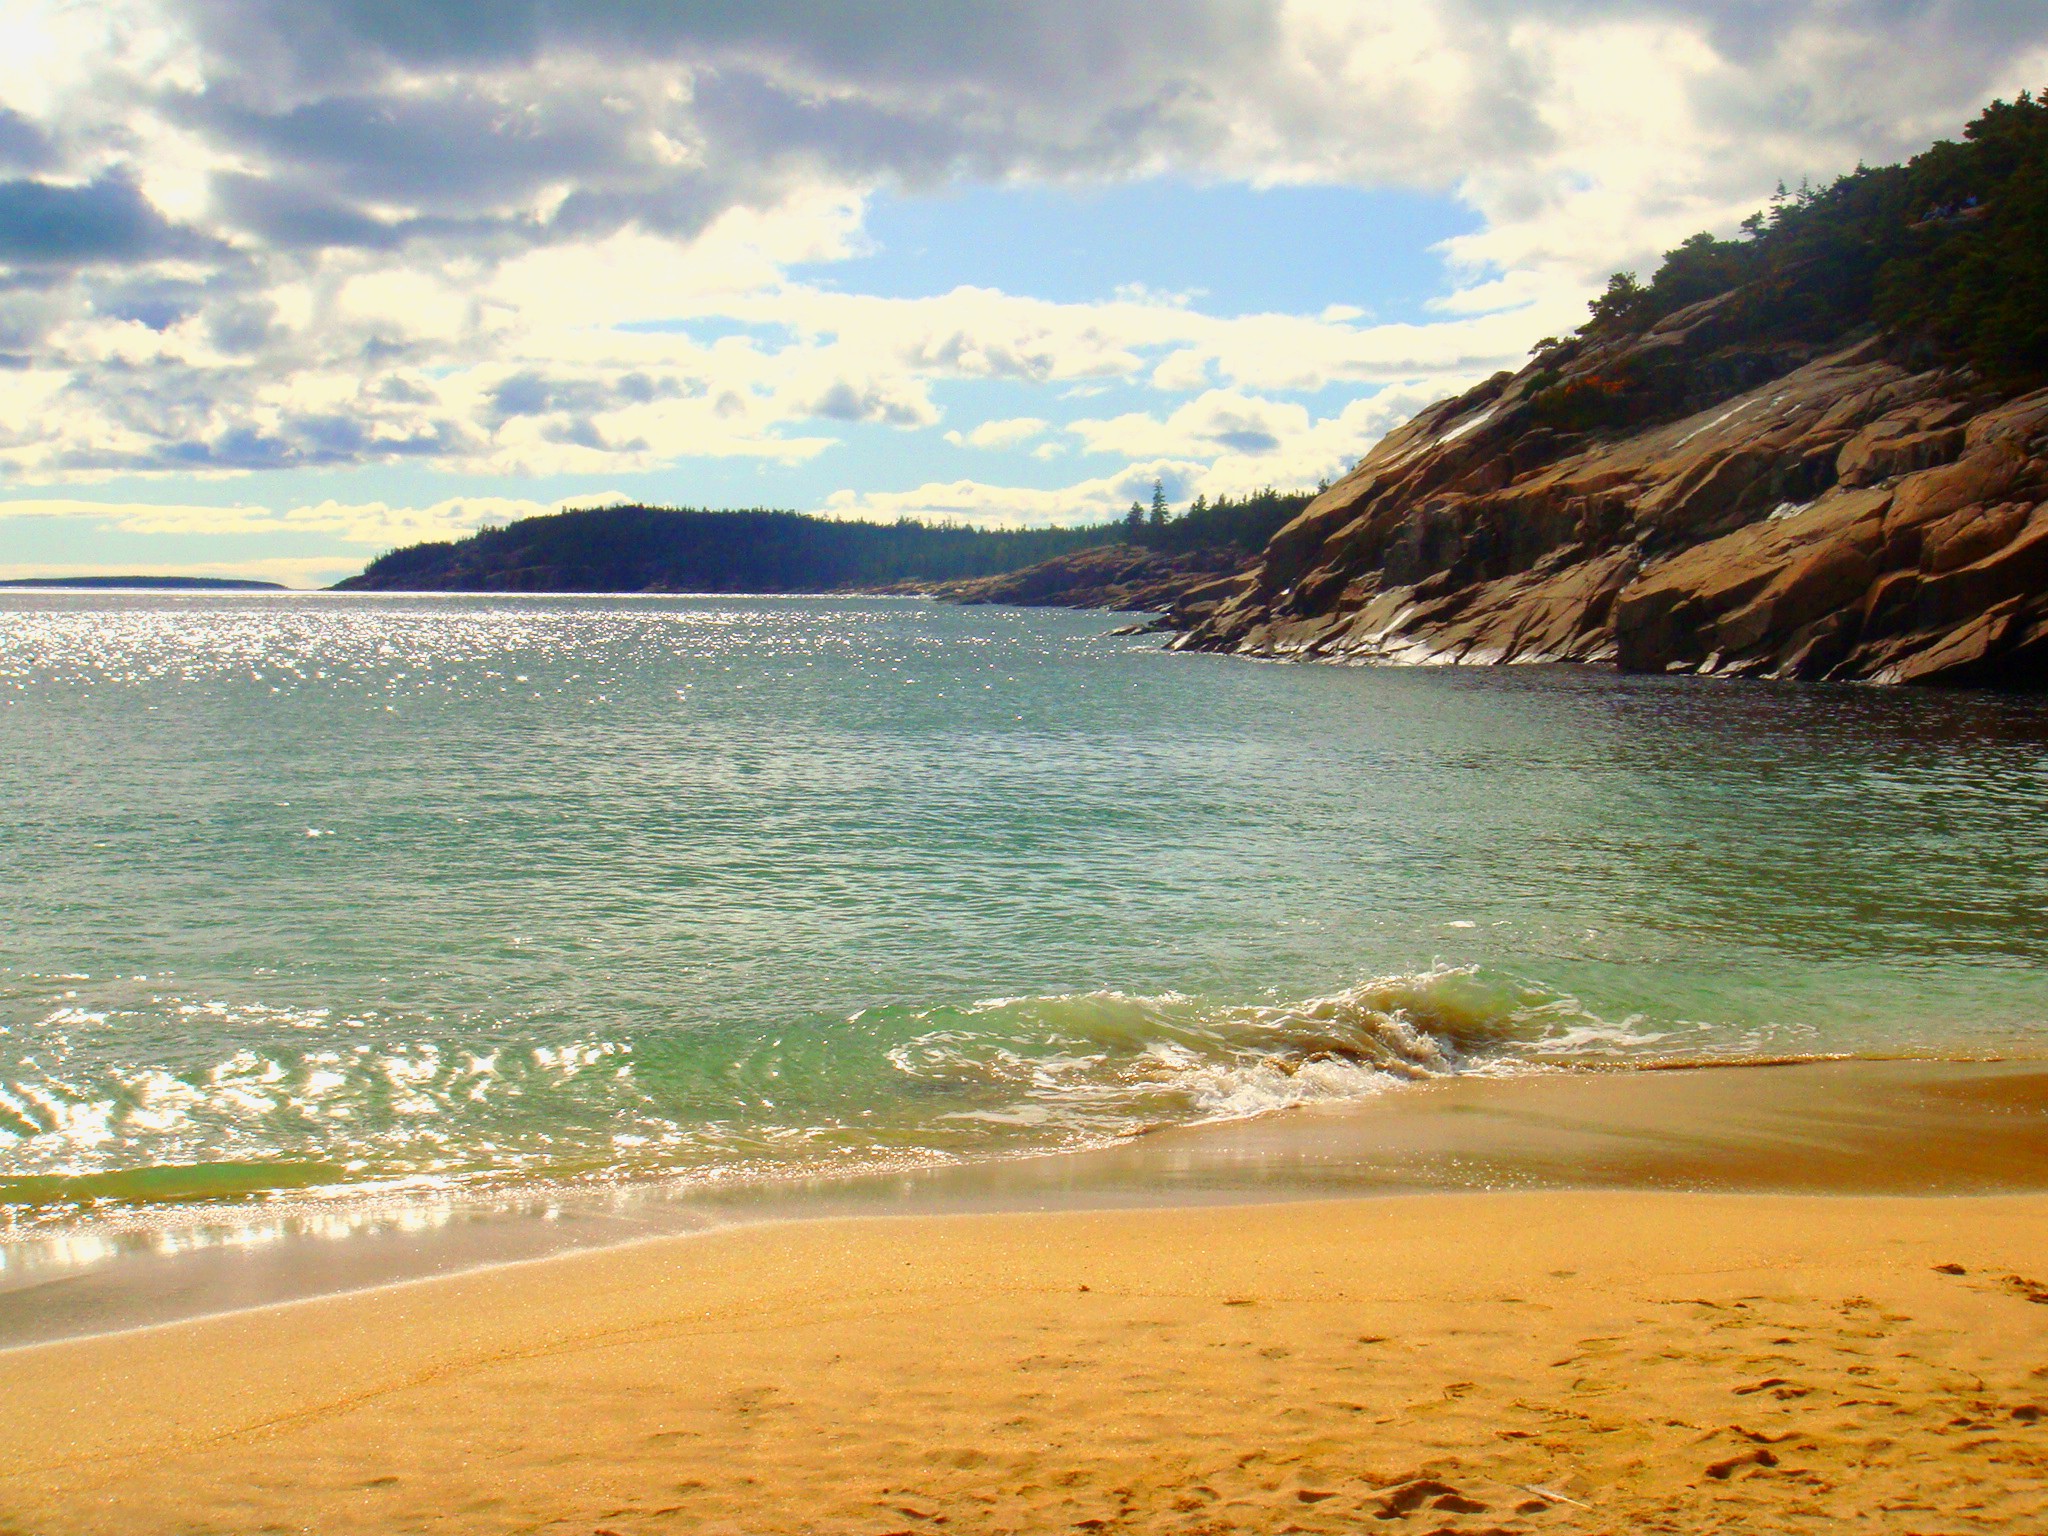 Sand Beach (2) In Acadia (user submitted)